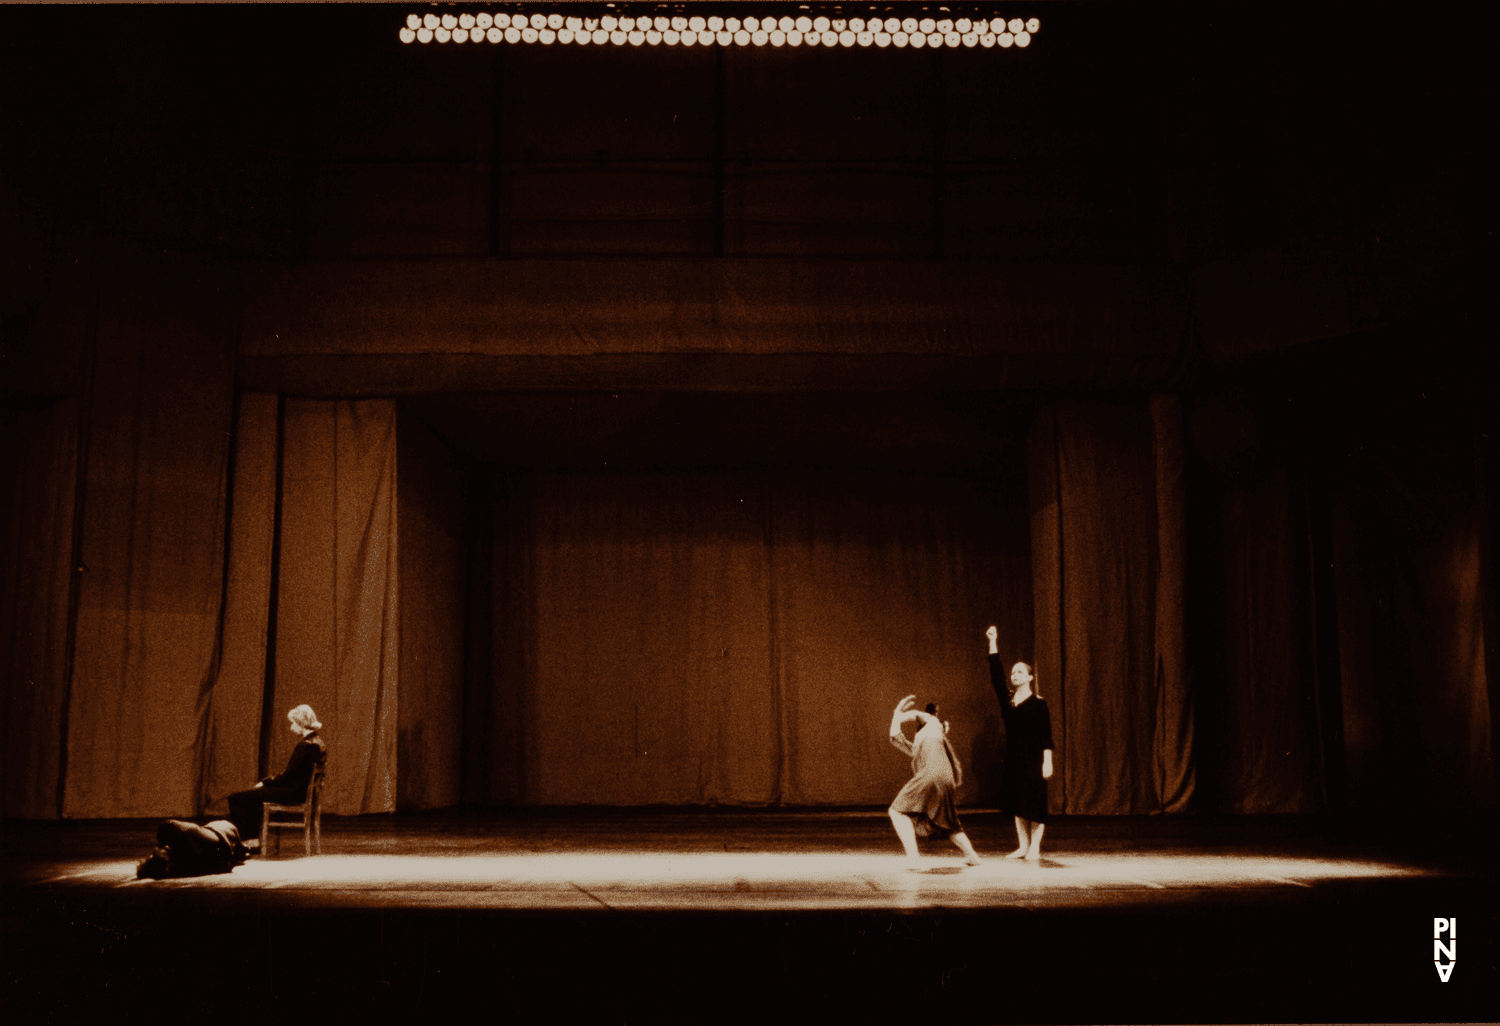 Josephine Ann Endicott and Dominique Mercy in “Adagio – Five Songs by Gustav Mahler” by Pina Bausch